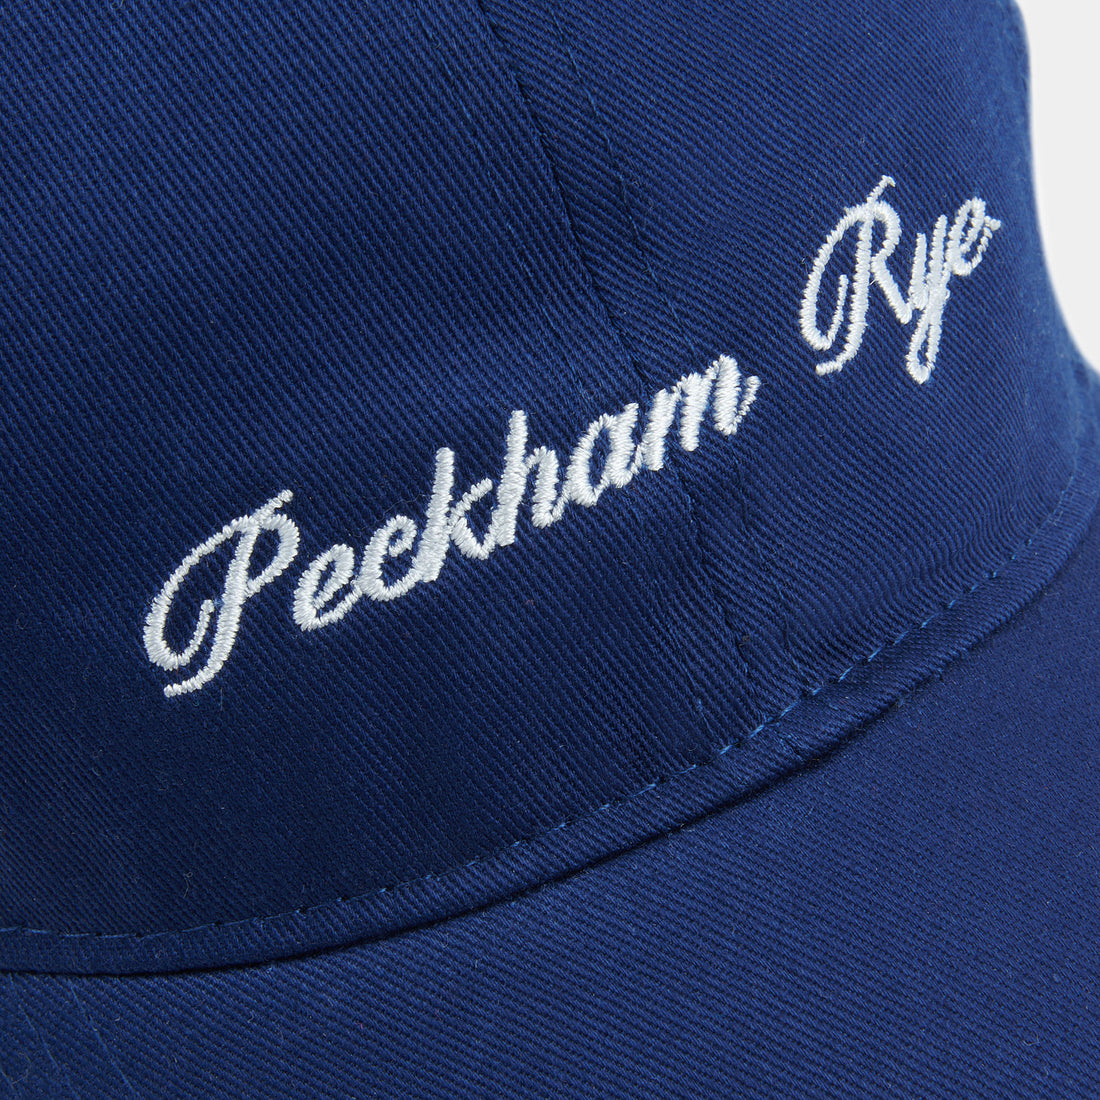 Embroidered Logo Cap in Midnight Blue